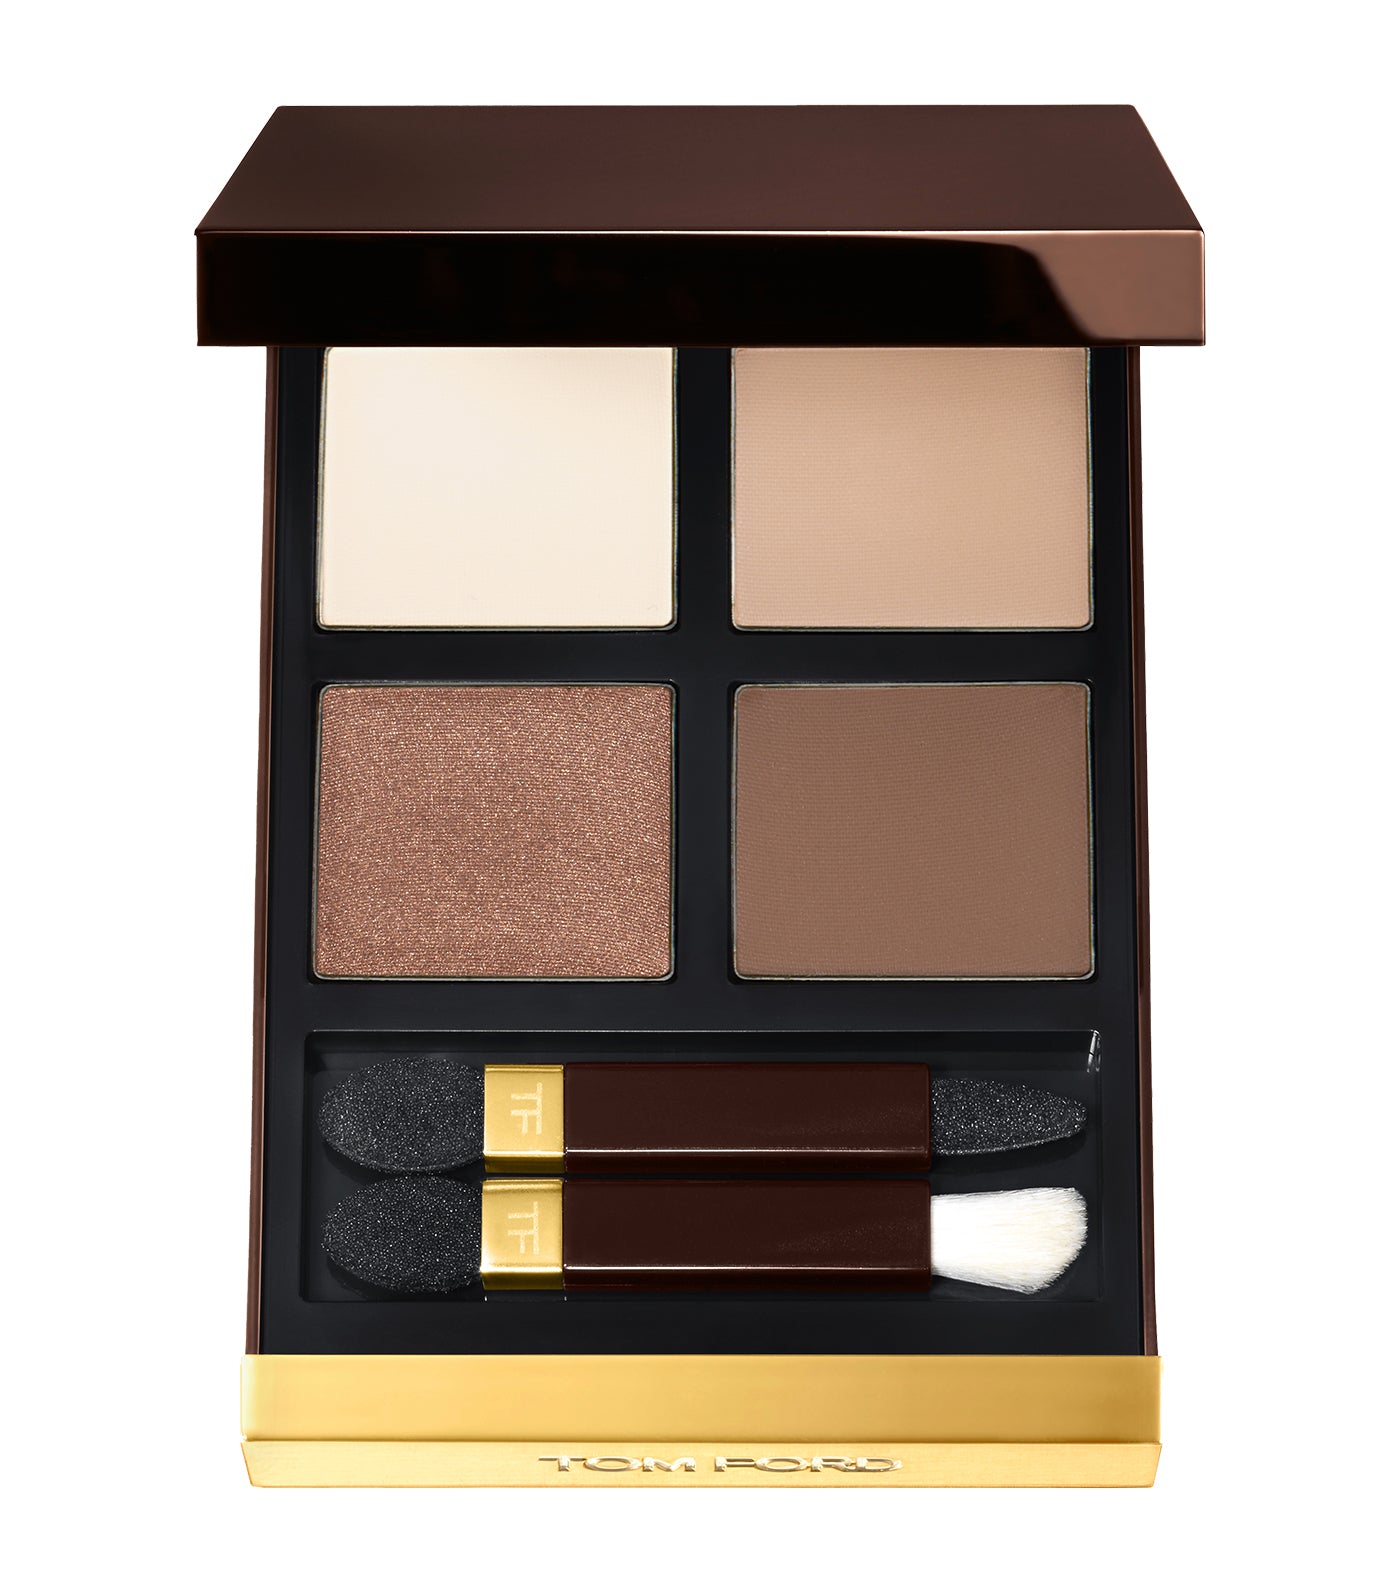 tom ford eye color quad cocoa mirage